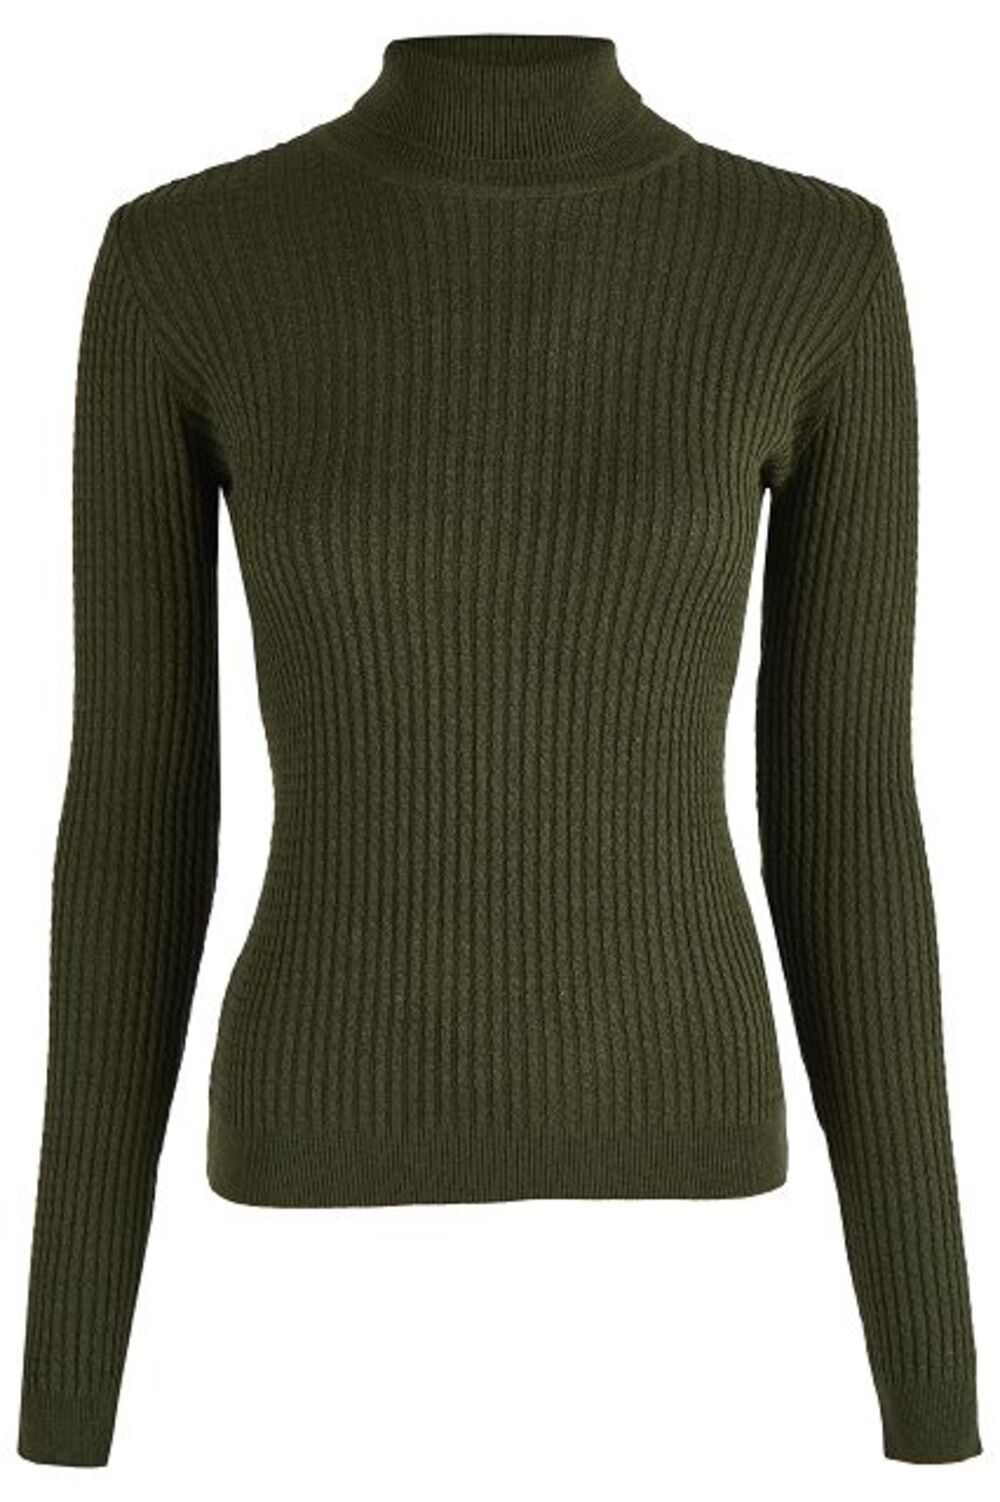 Women's knitted sweater Roding